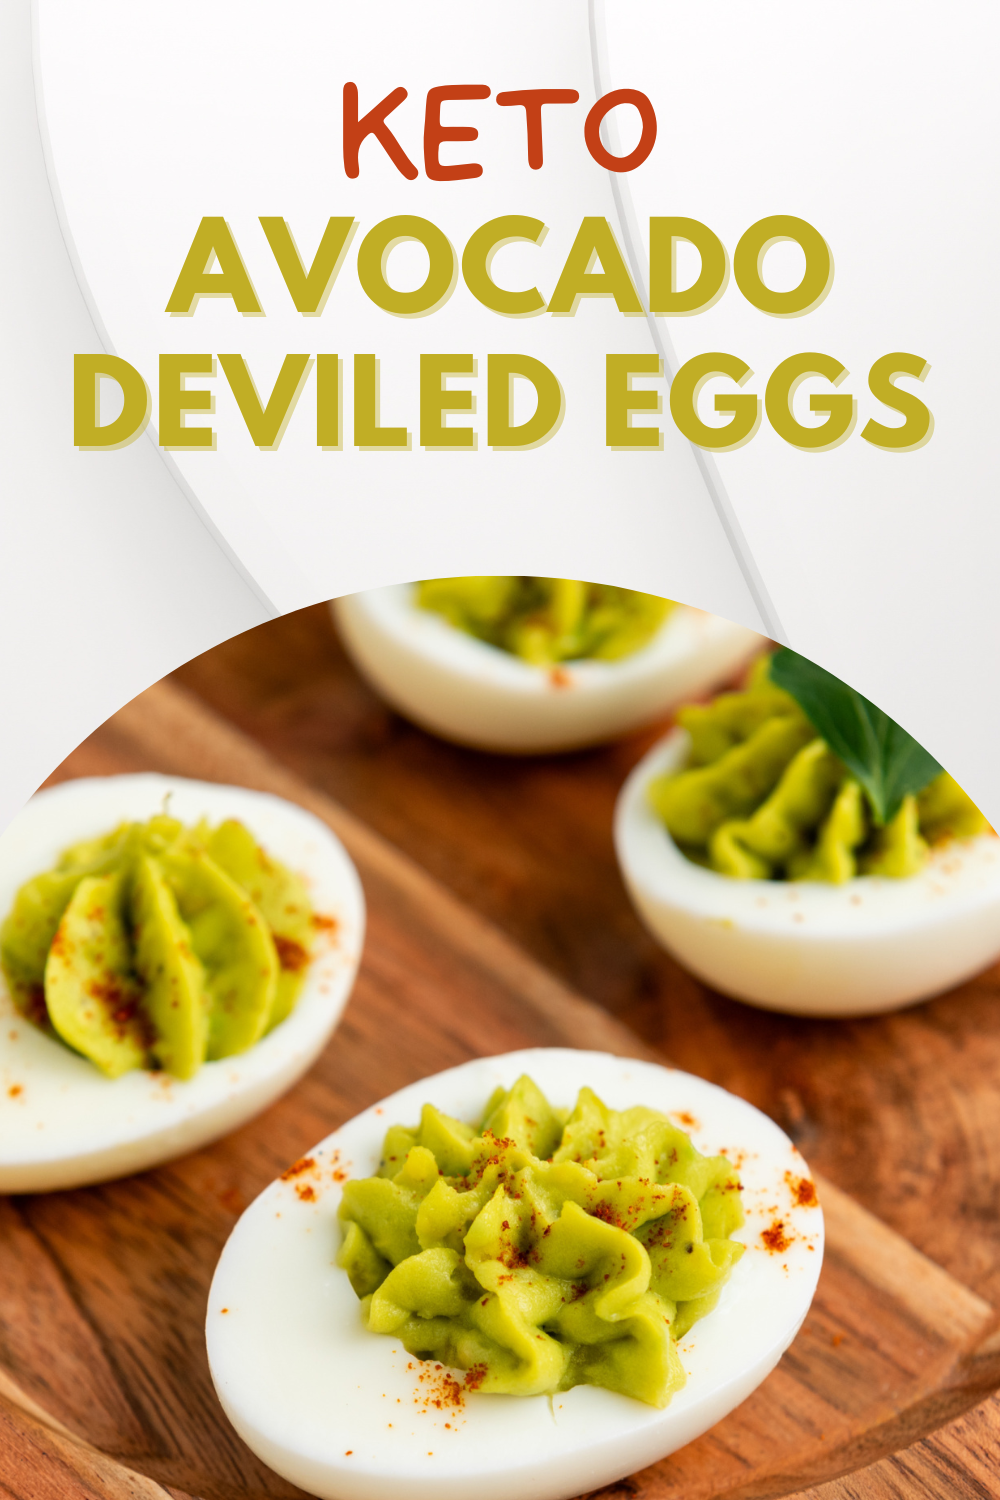 These Keto Avocado Deviled Eggs are a beautiful twist on a classic appetizer ~ brought together with just a few simple ingredients, while being keto-friendly and low-carb!